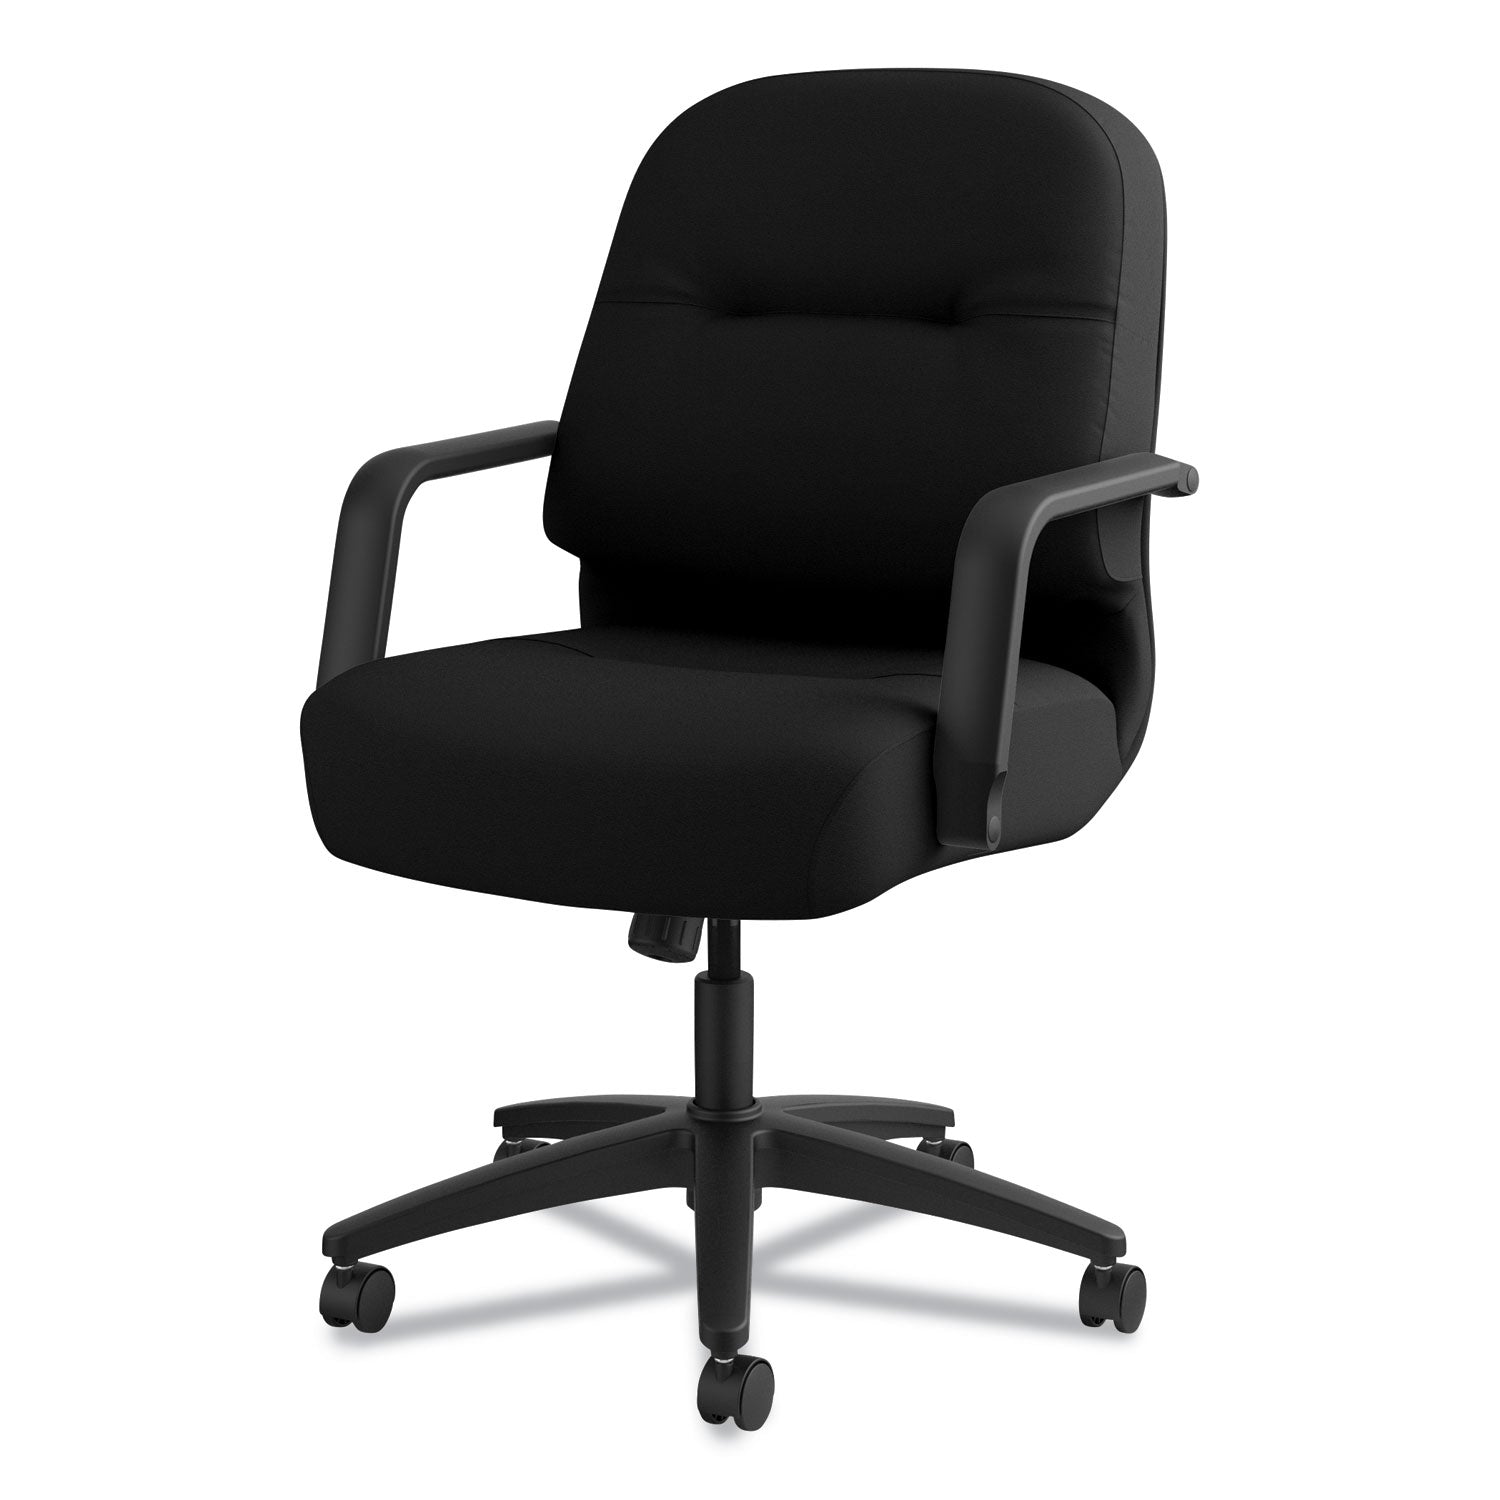 pillow-soft-2090-series-managerial-mid-back-swivel-tilt-chair-supports-up-to-300-lb-17-to-21-seat-height-black_hon2092cu10t - 3